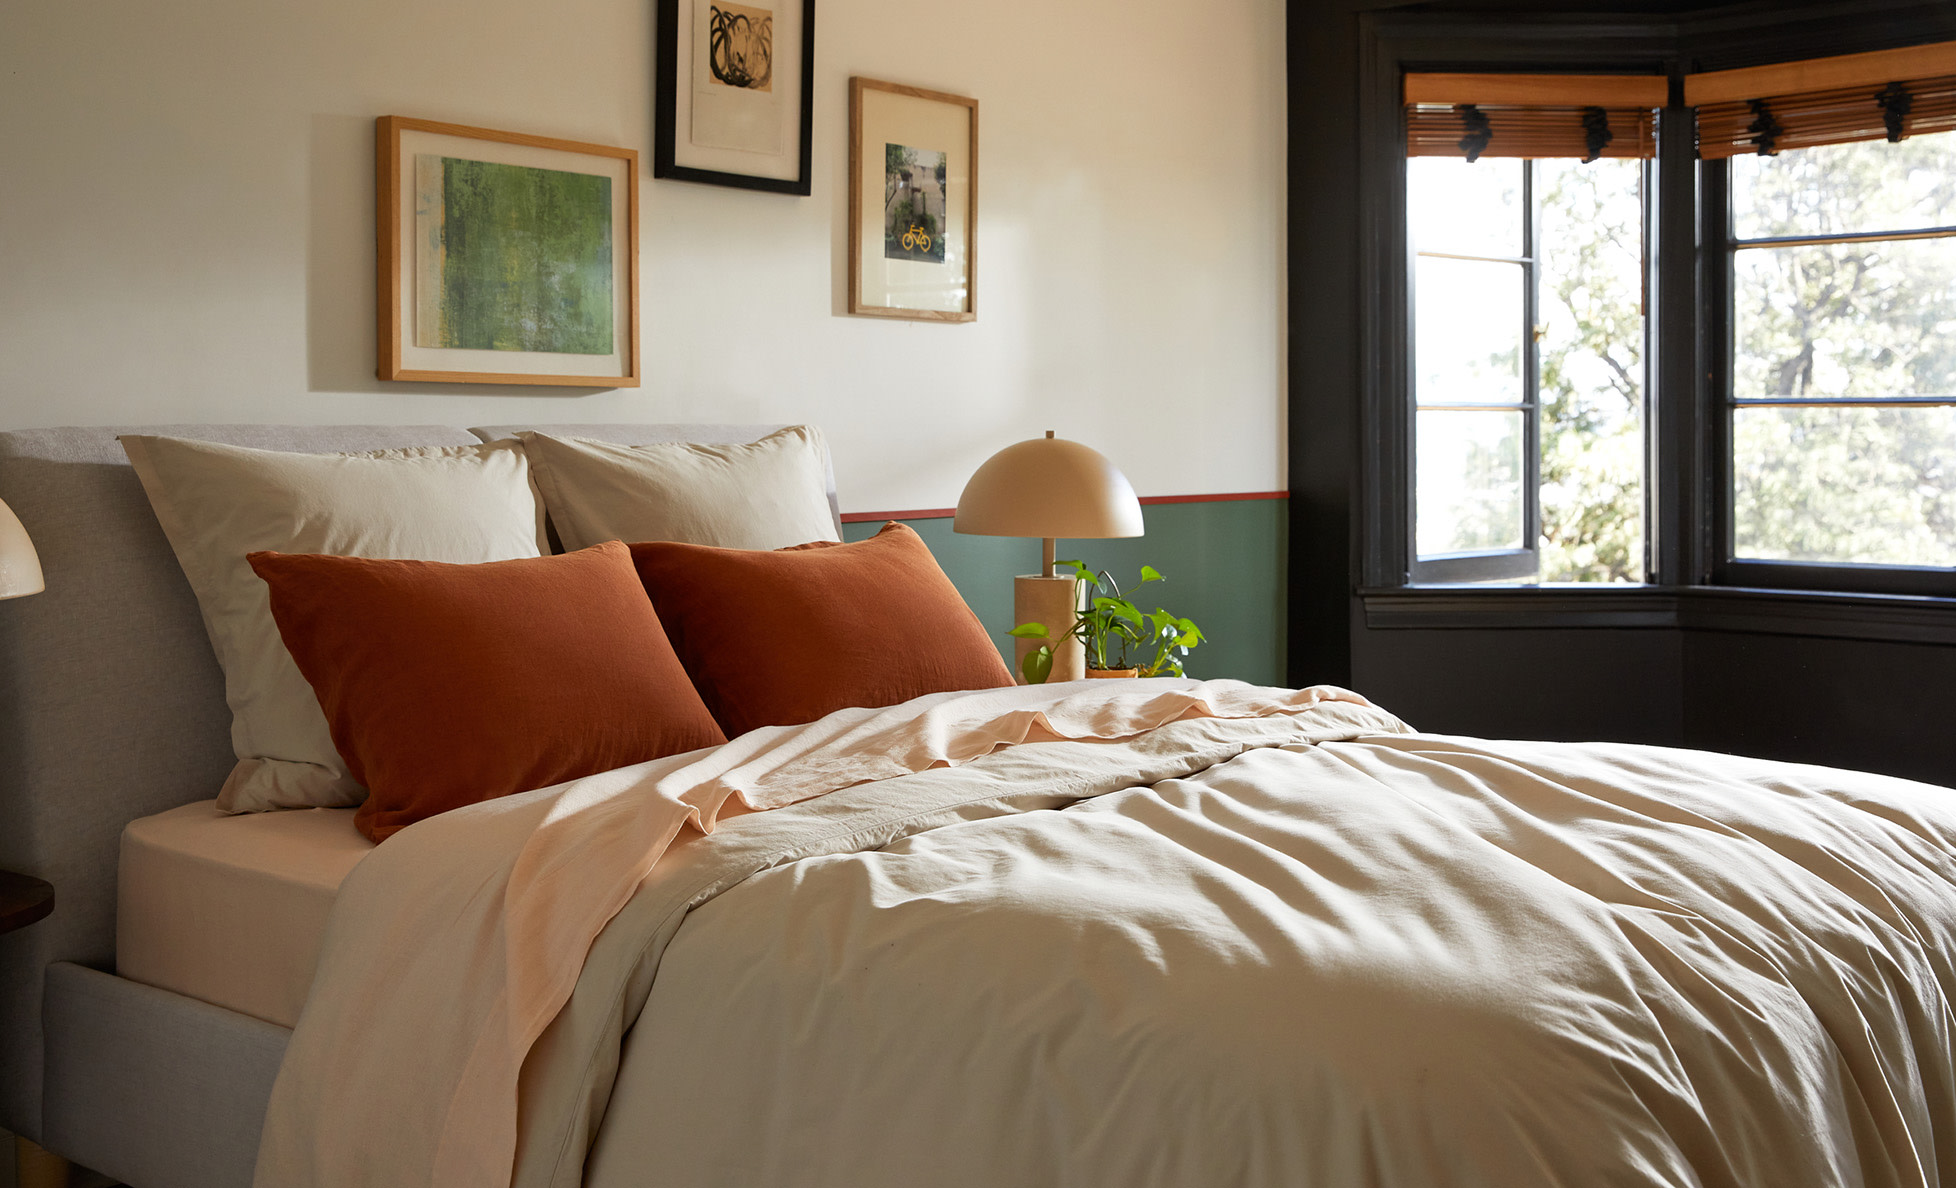 A casual bed with neutral toned sheeting and orange pillows